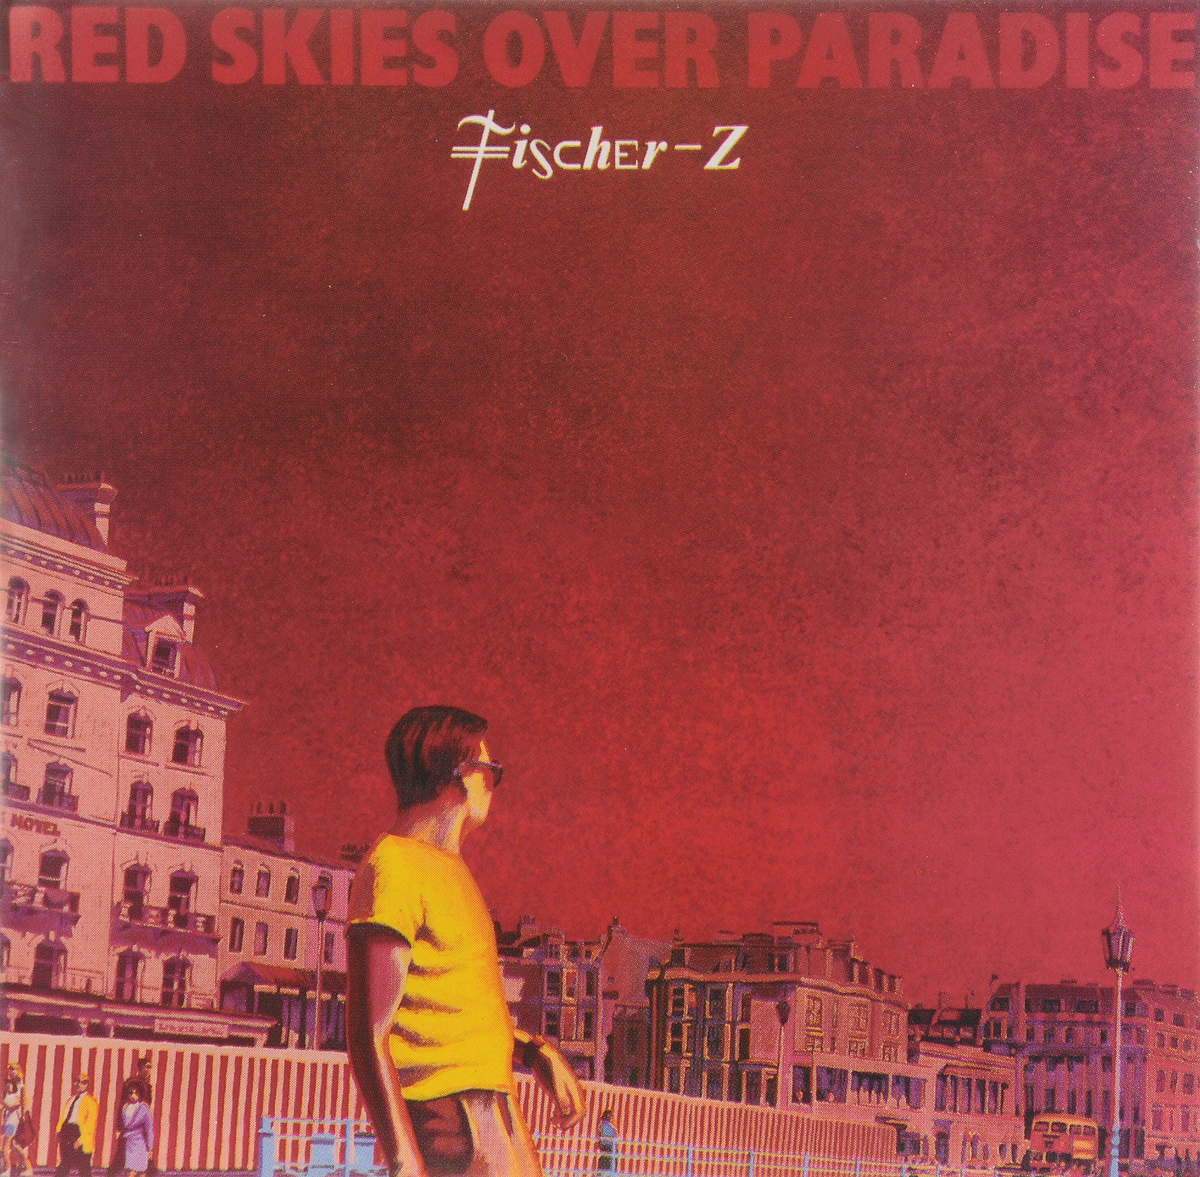 FISCHER-Z. RED SKIES OVER PARADISE